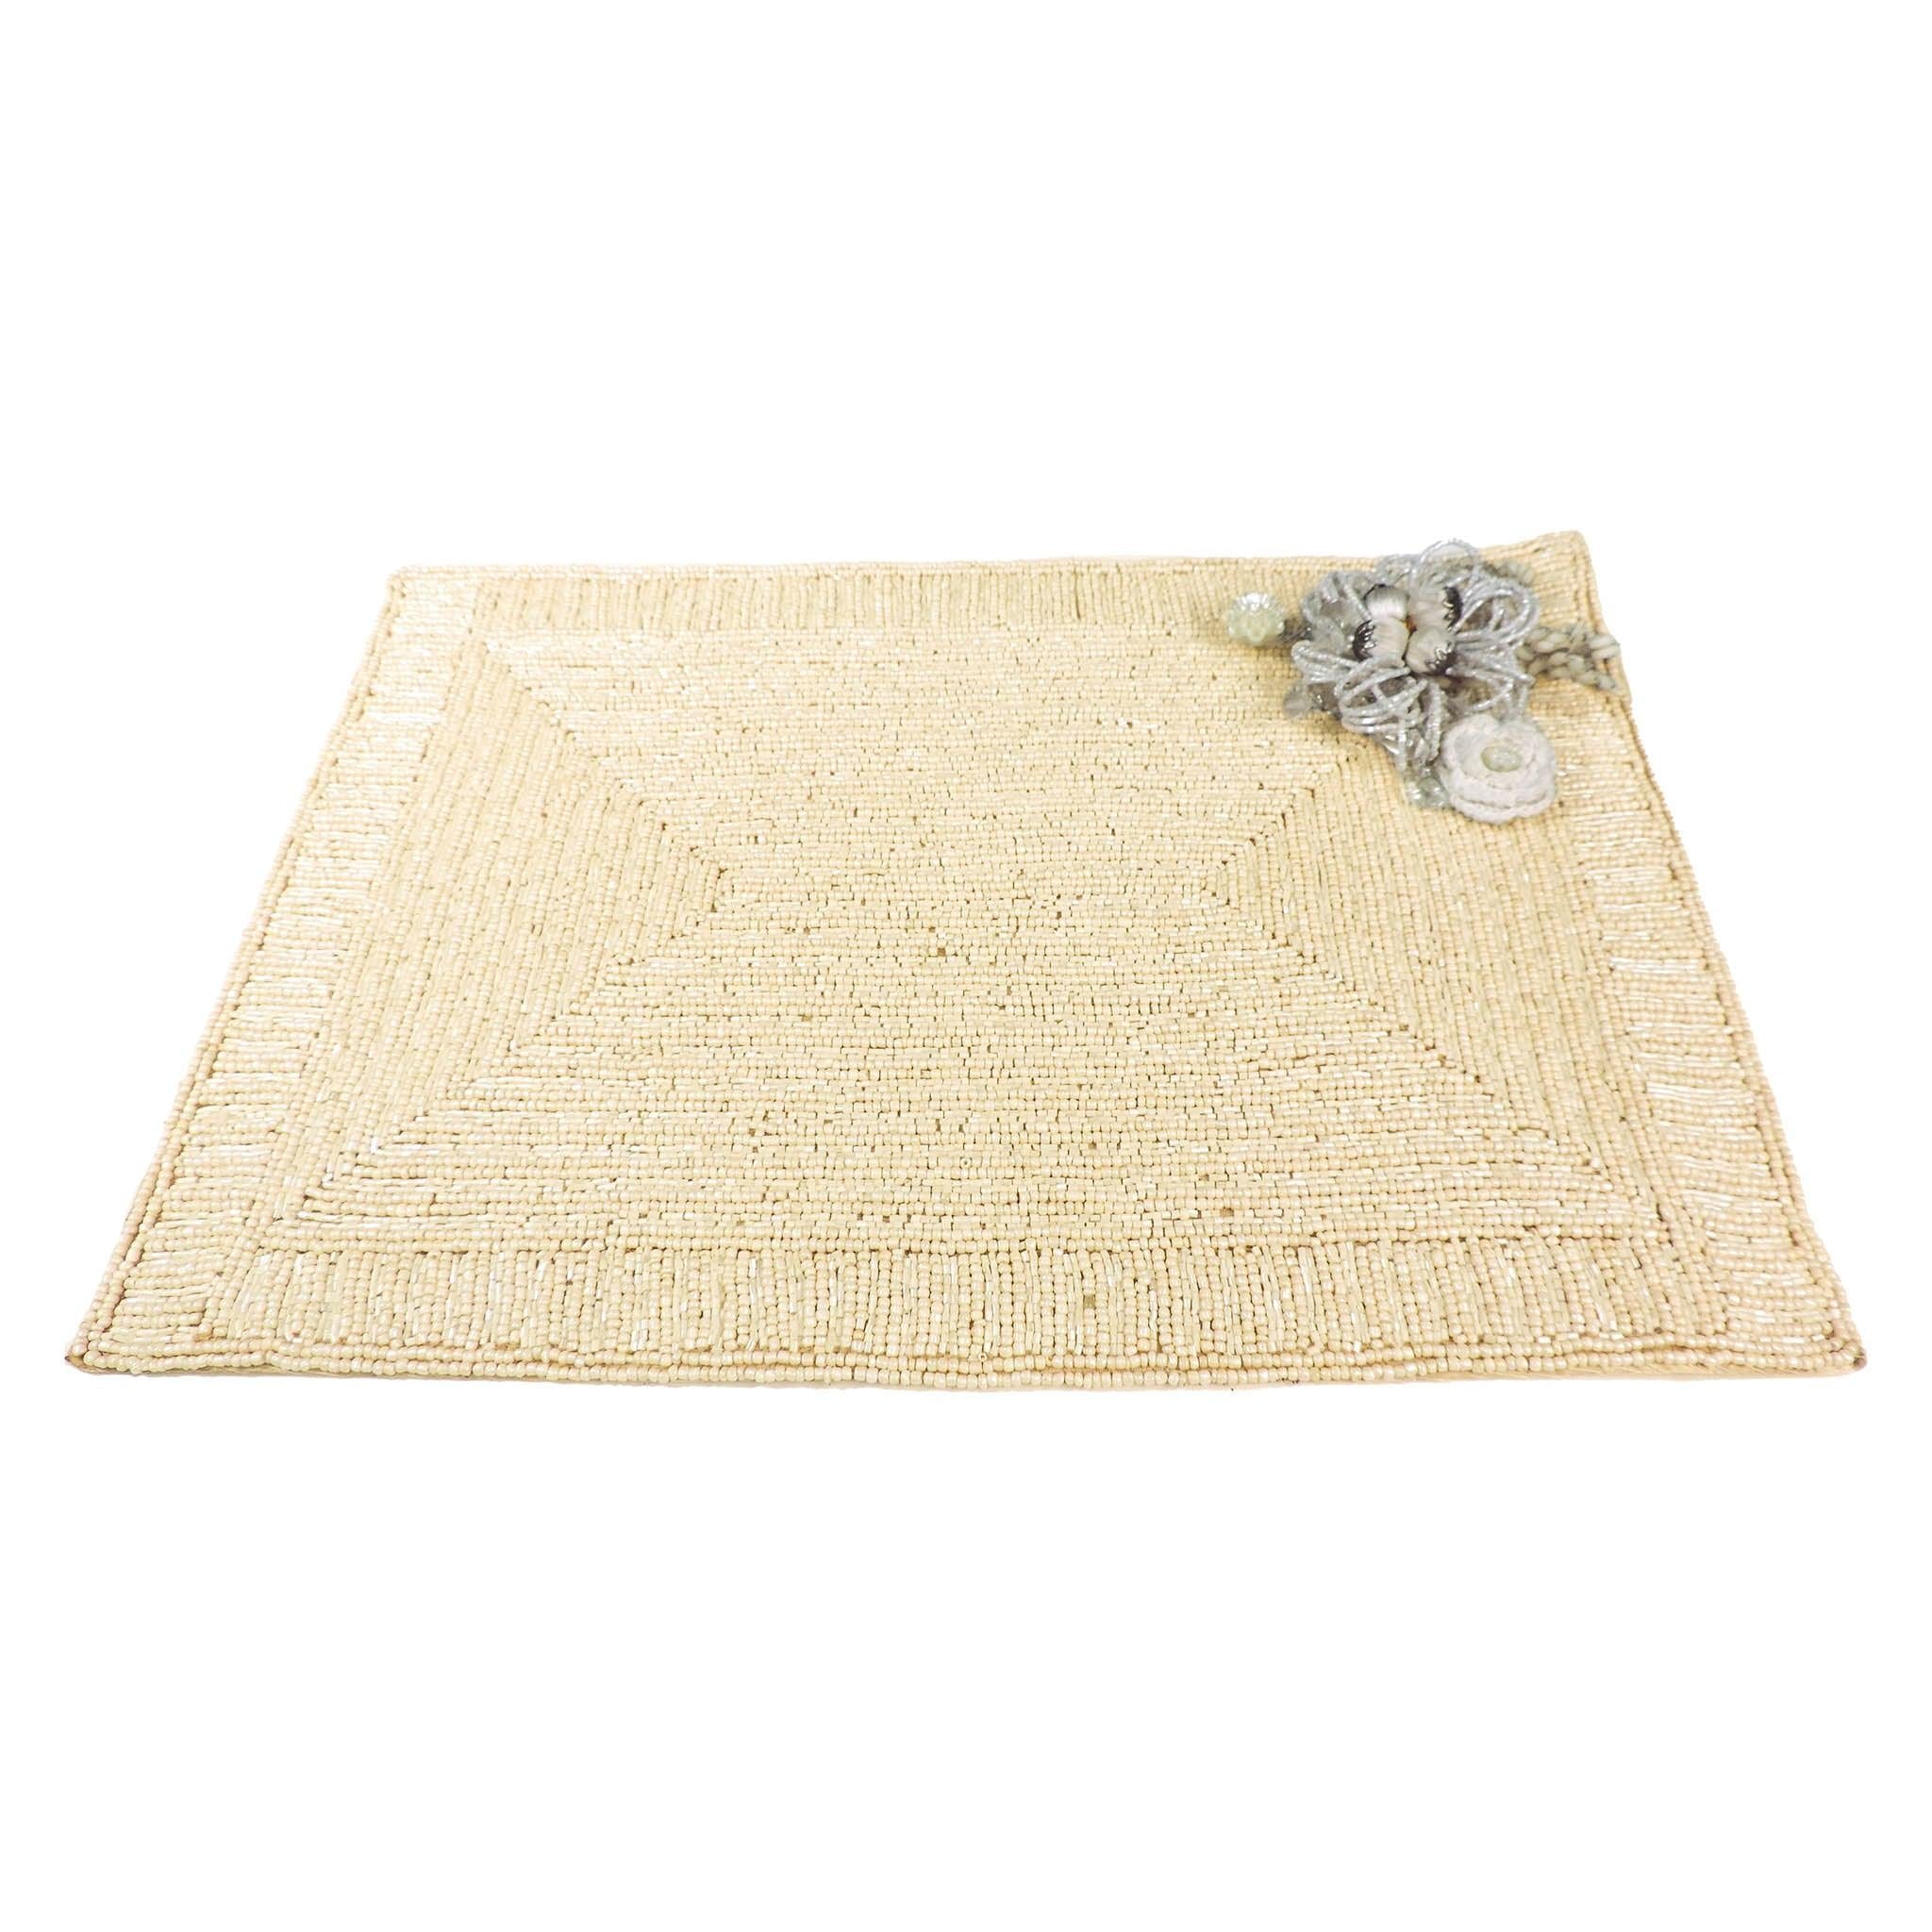 Glass Bead Embroidered Flower Placemat in Cream, Set of 2/4